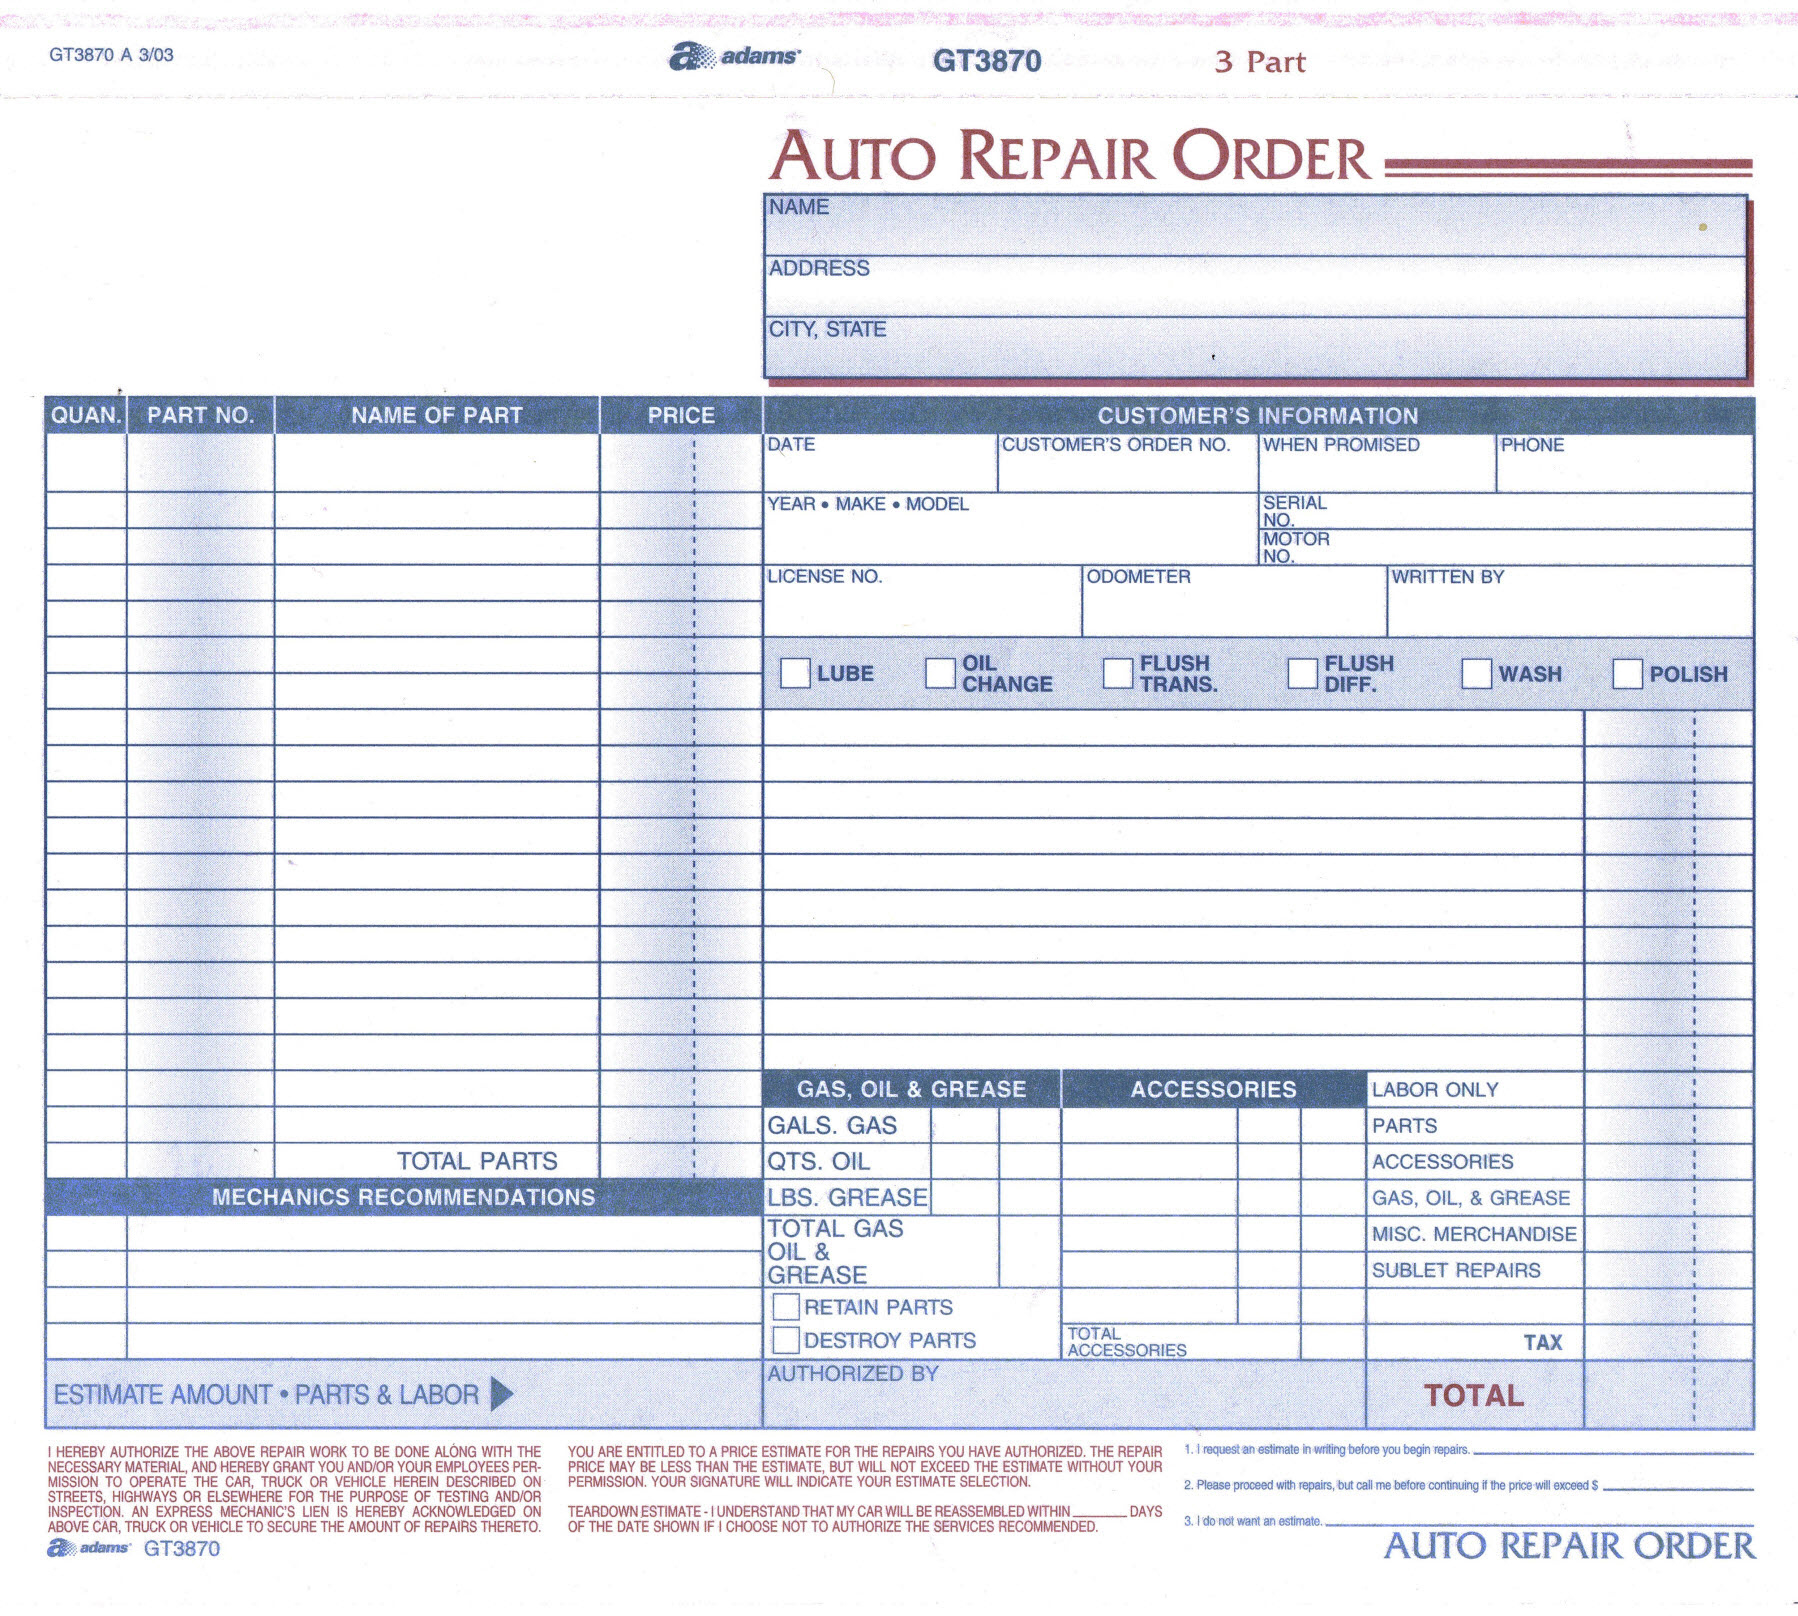 Work Order Forms Auto Repair With Carbon 3 Part 8 12 x 7 Box Of 